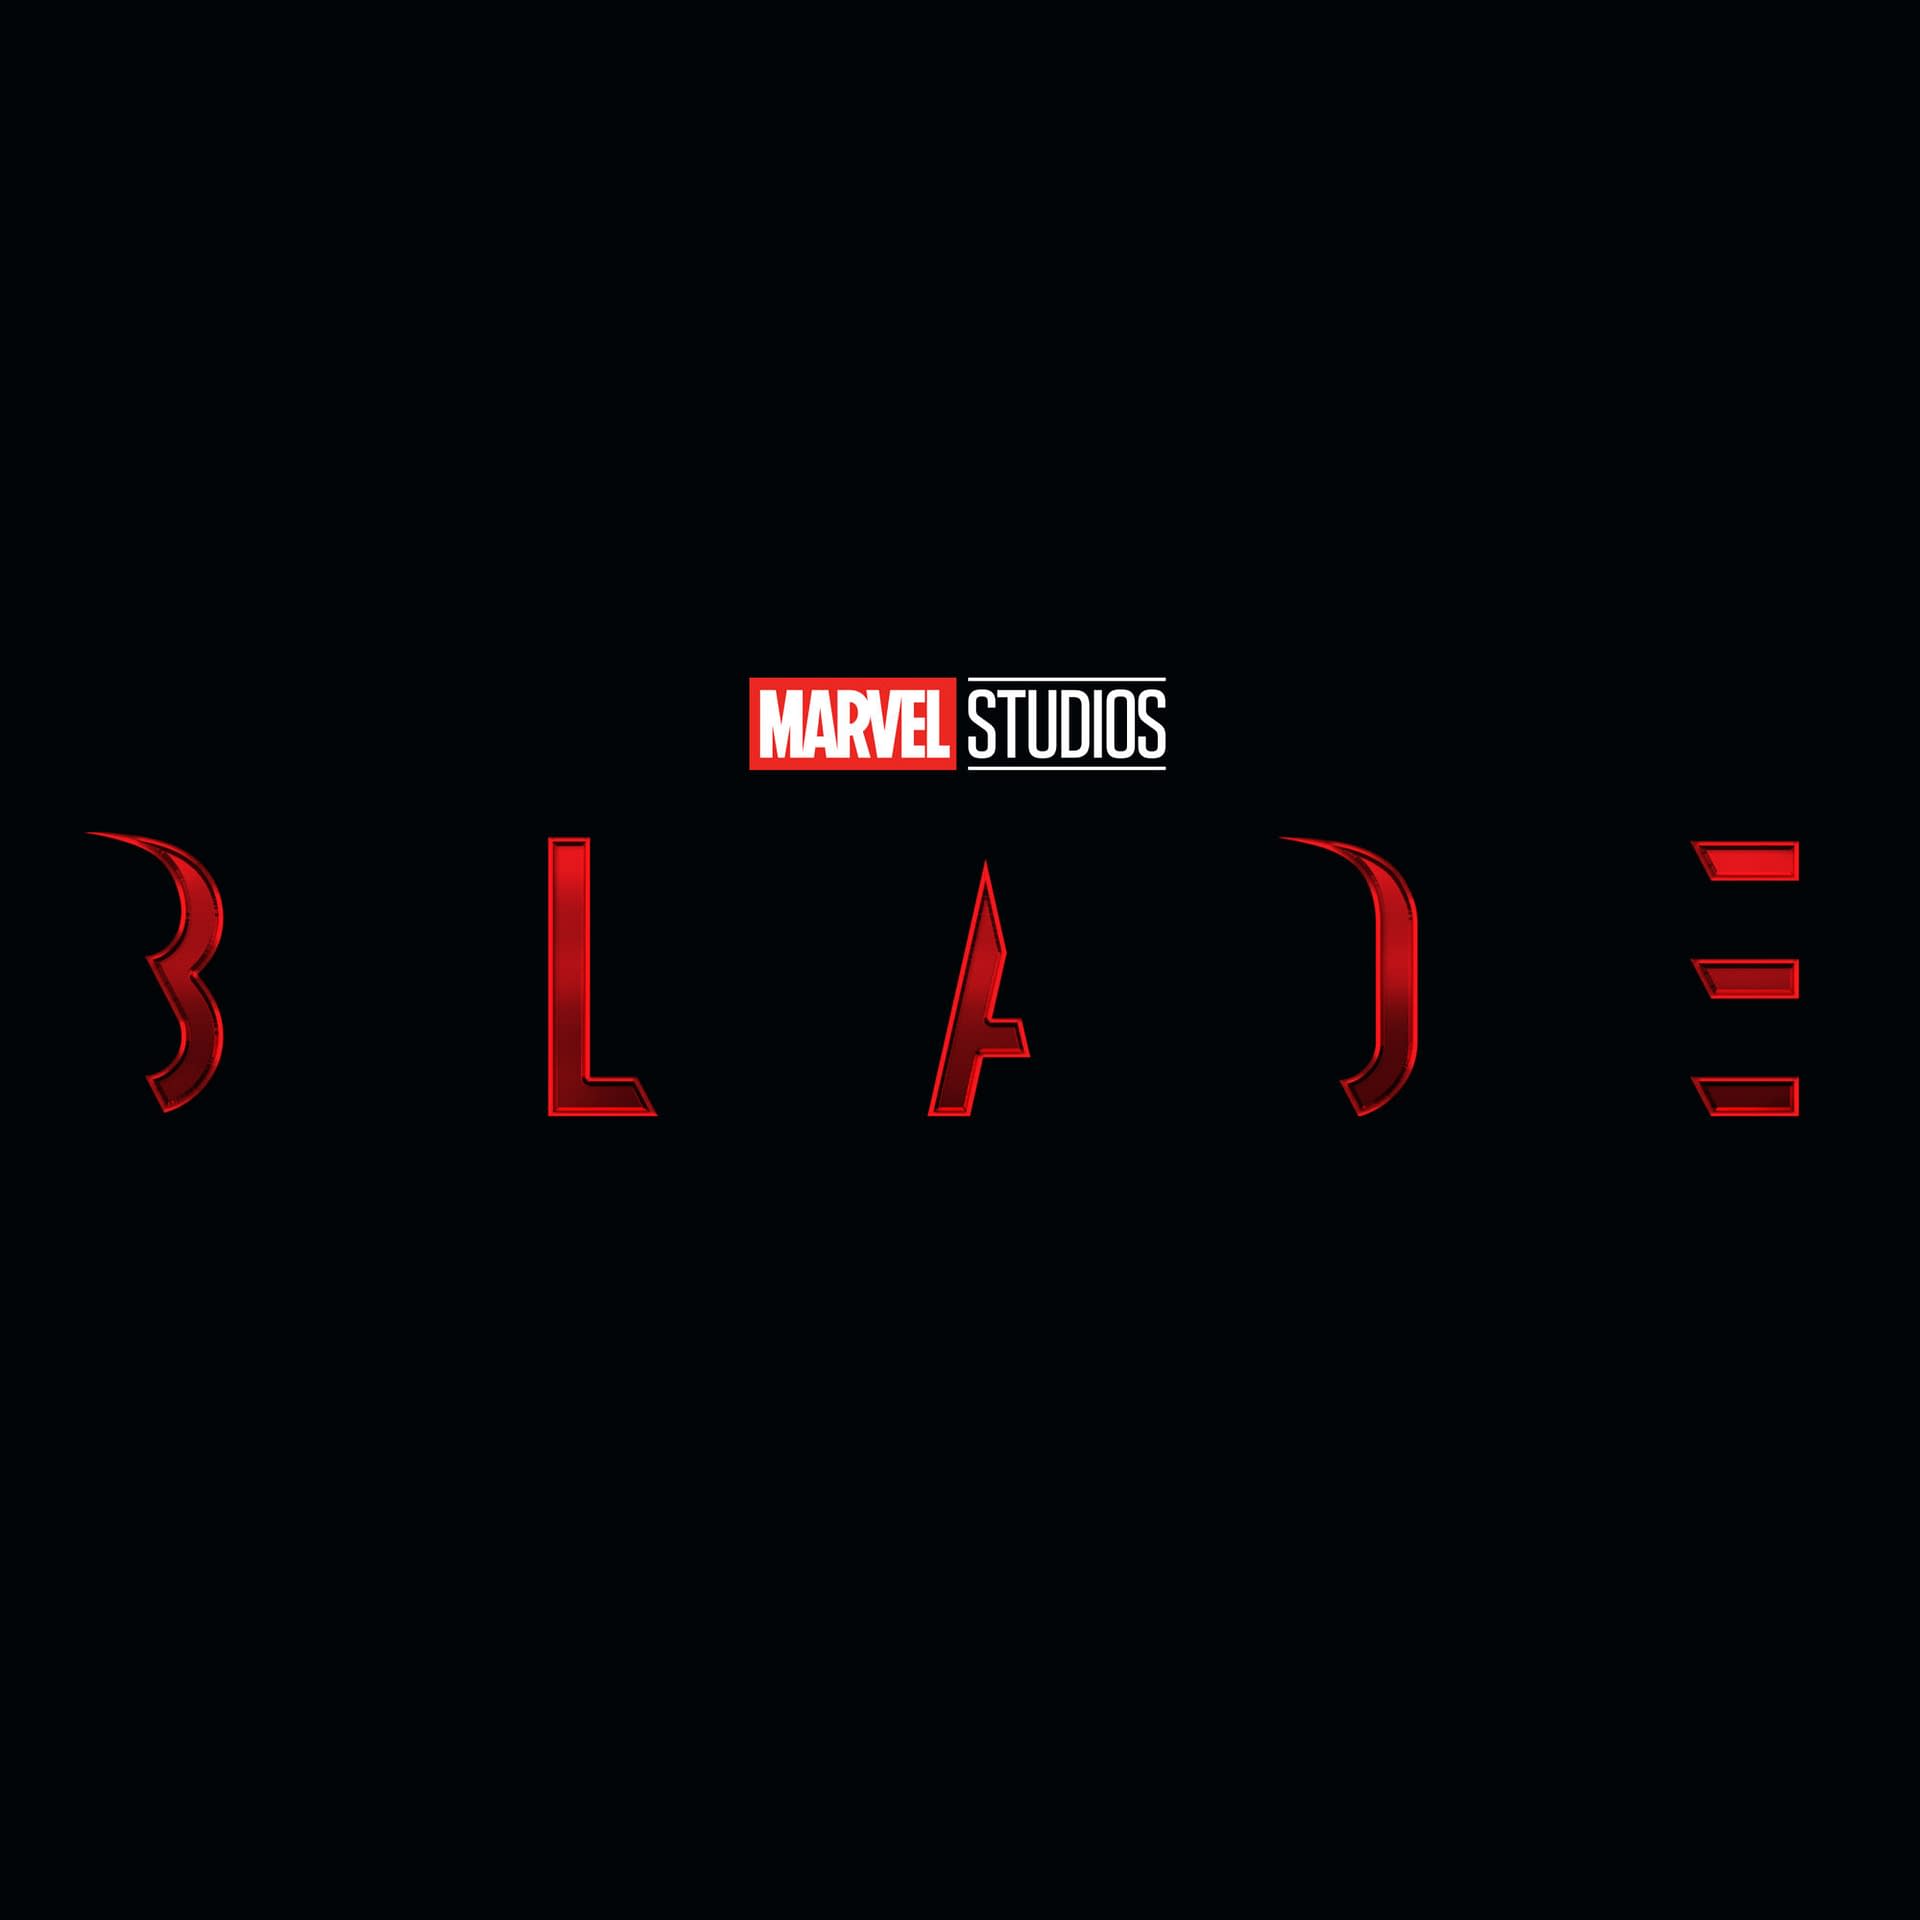 Marvel Studios Announces Phase 5 At SDCC, Here Is The List